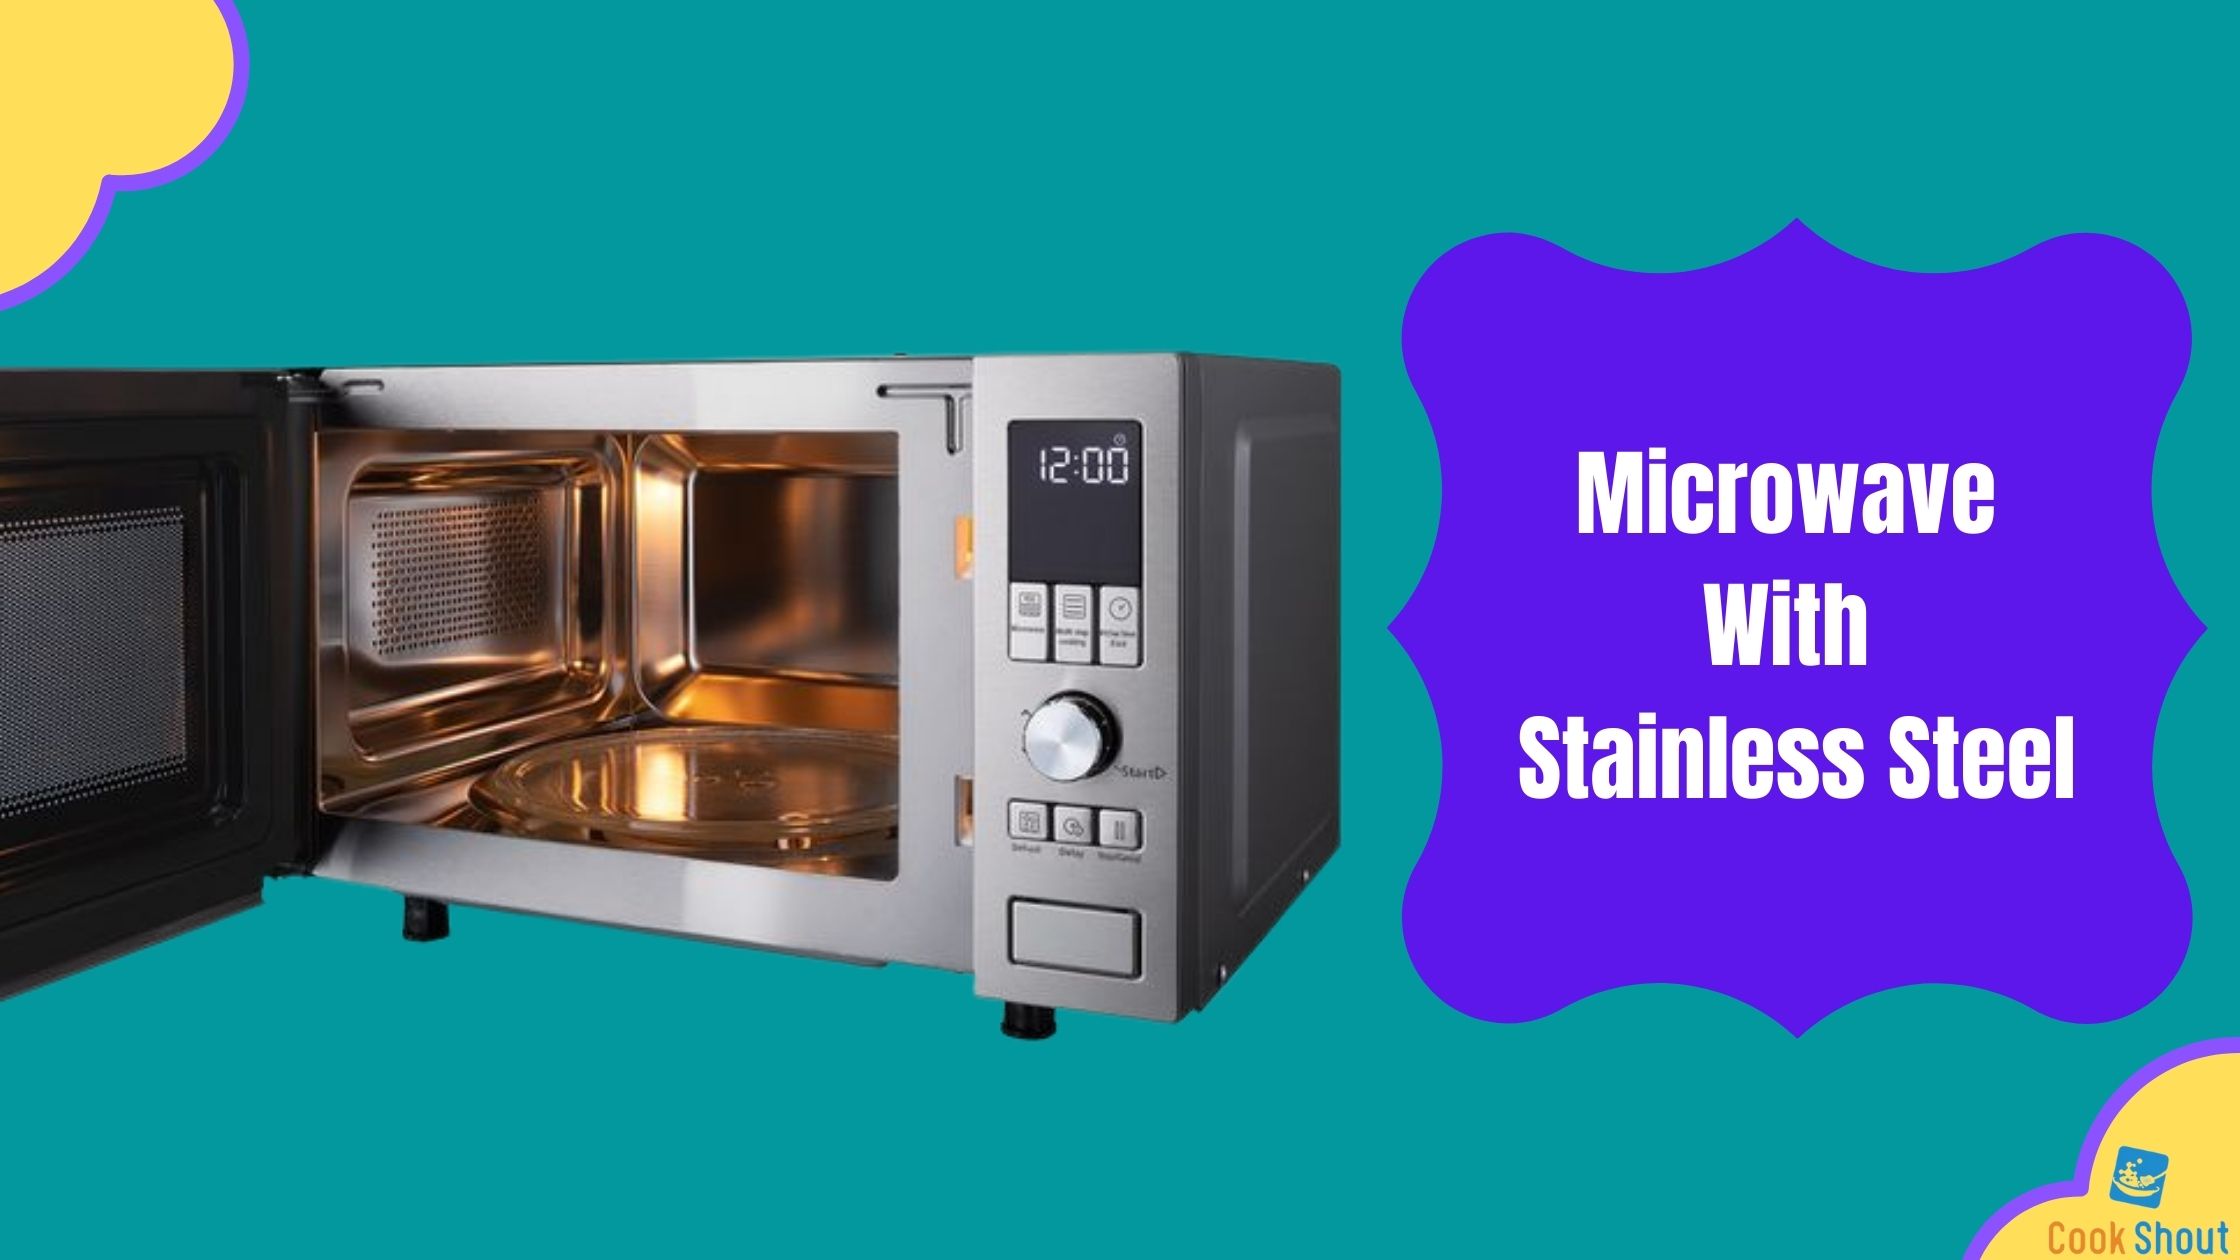 Microwave With Stainless Steel 2021